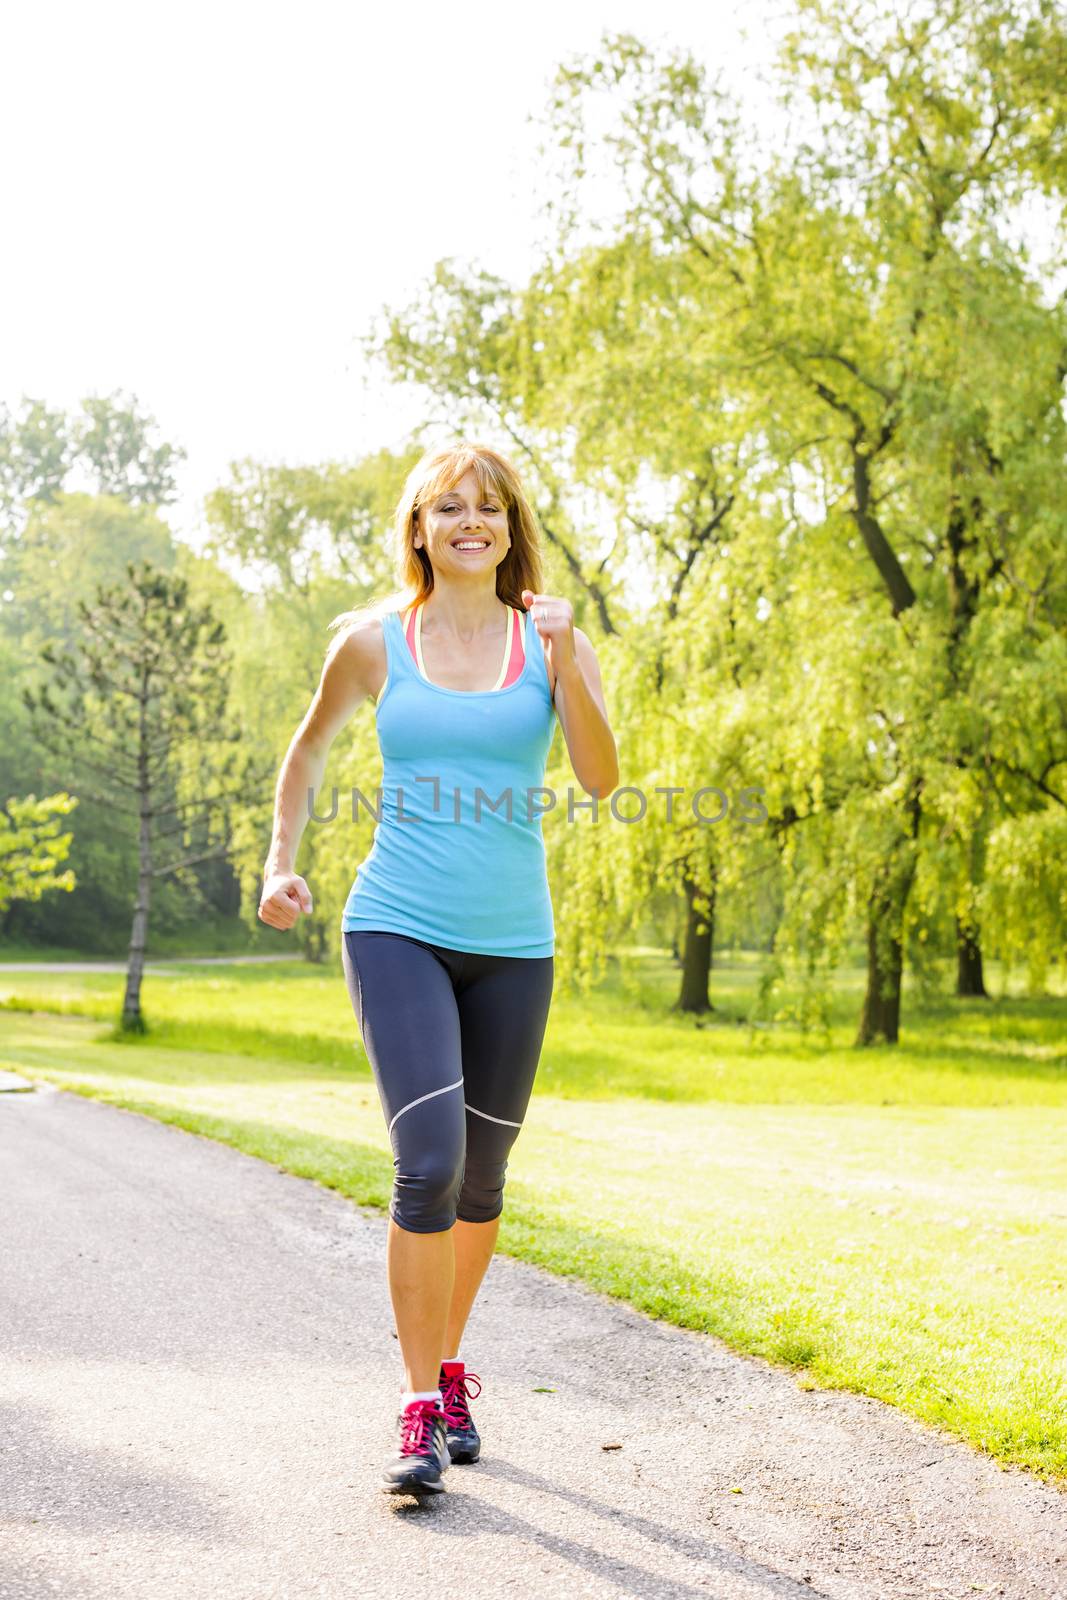 Smiling woman exercising on running path in green summer park